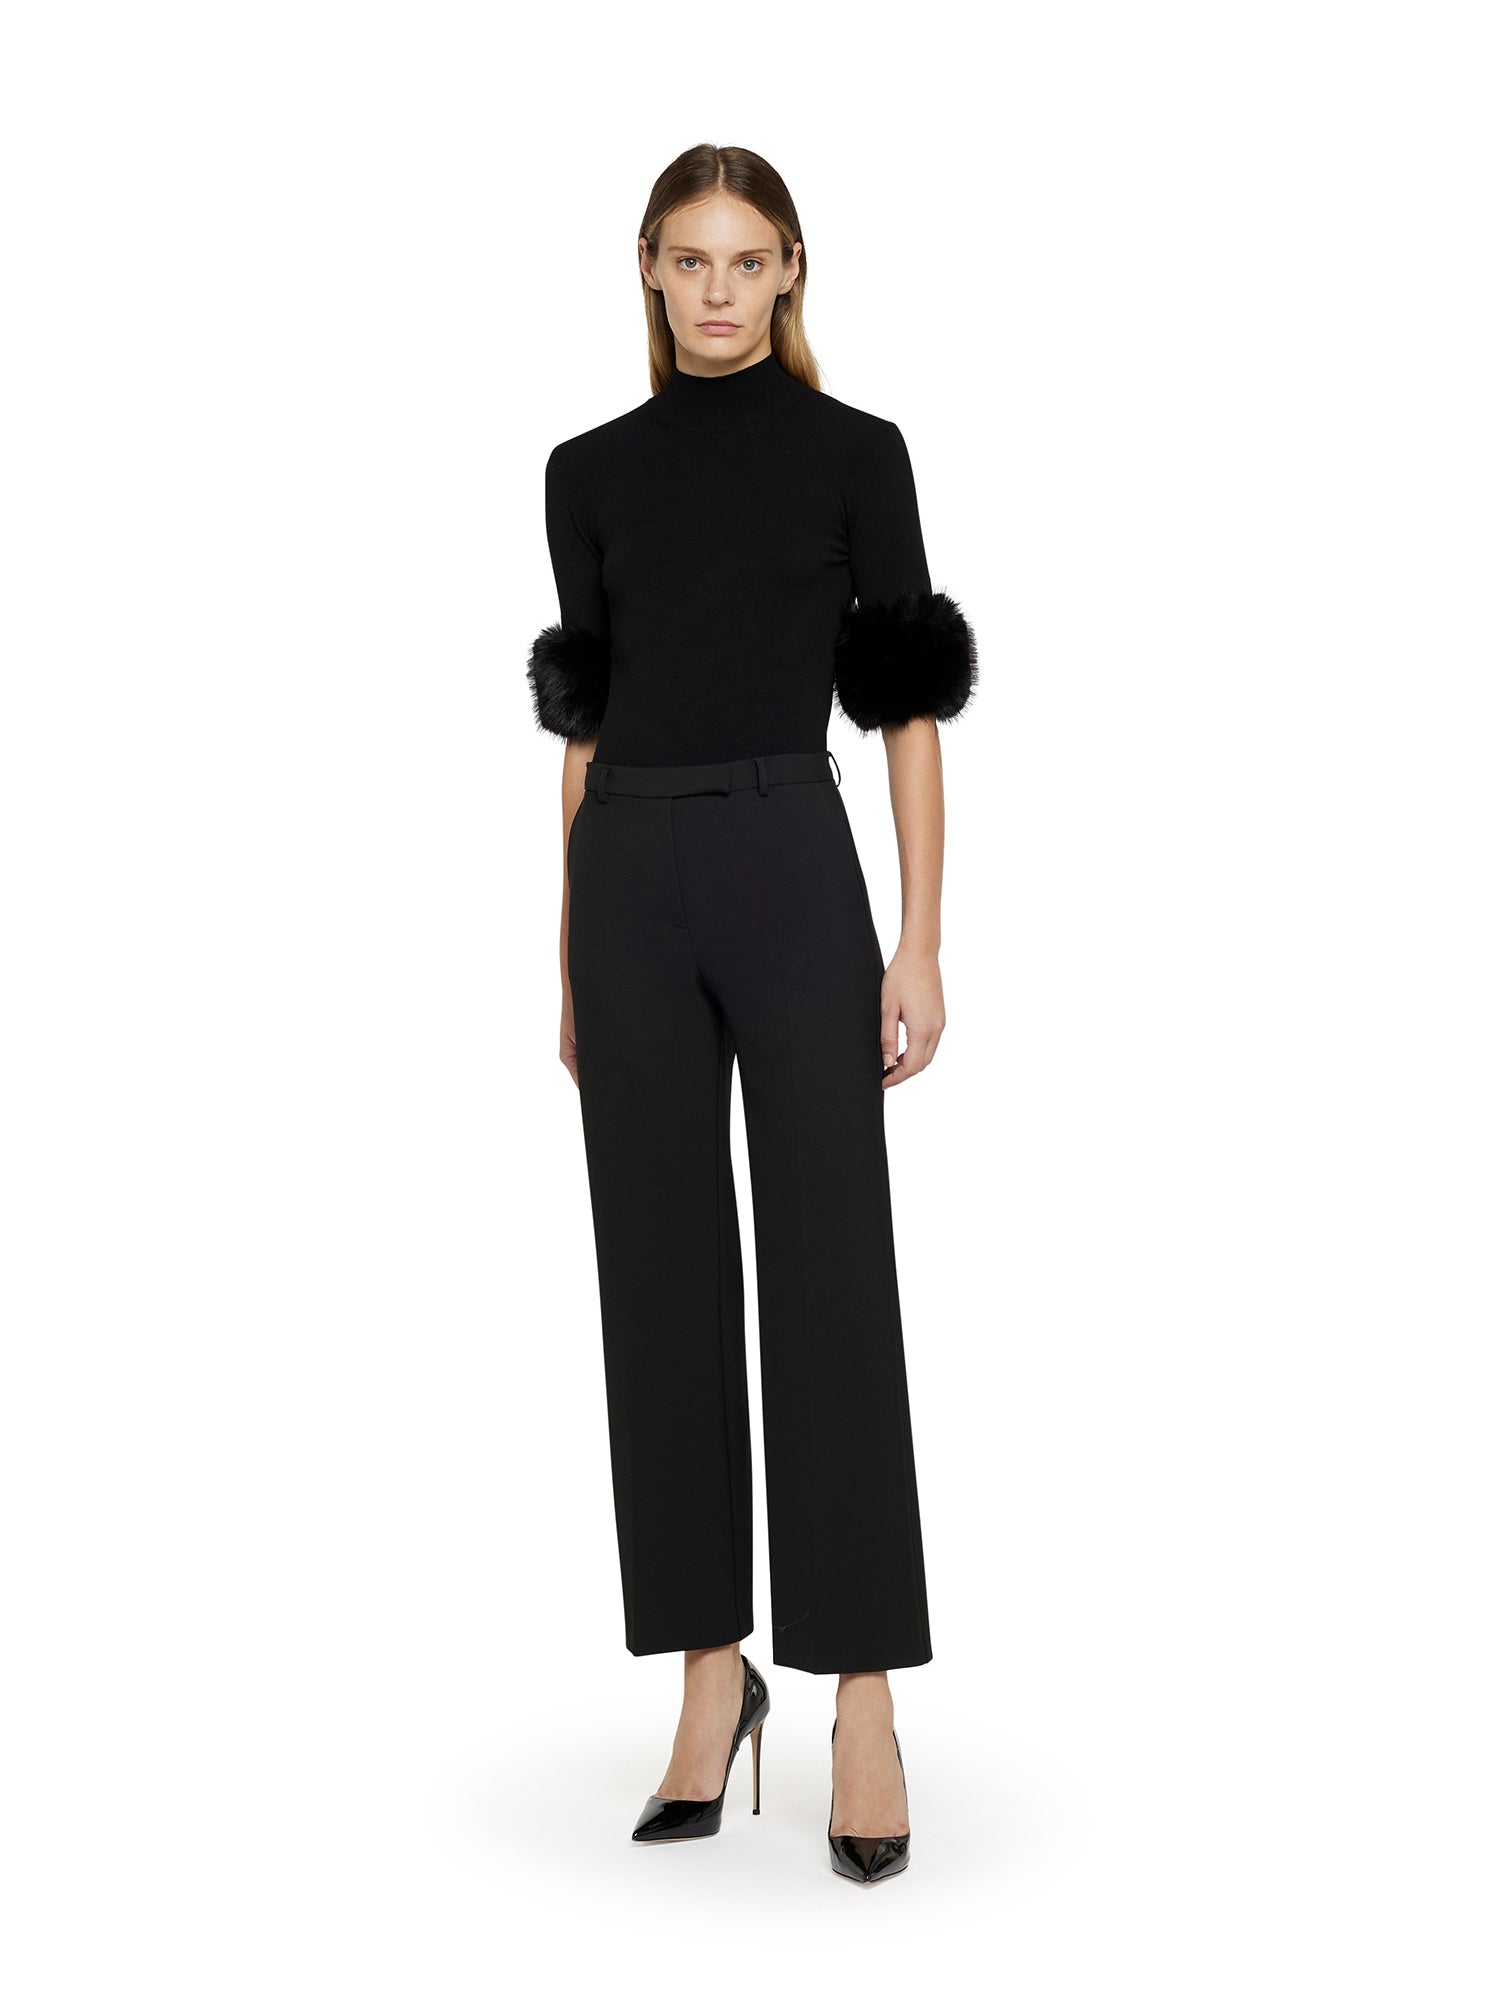 High-waisted cropped flare trousers